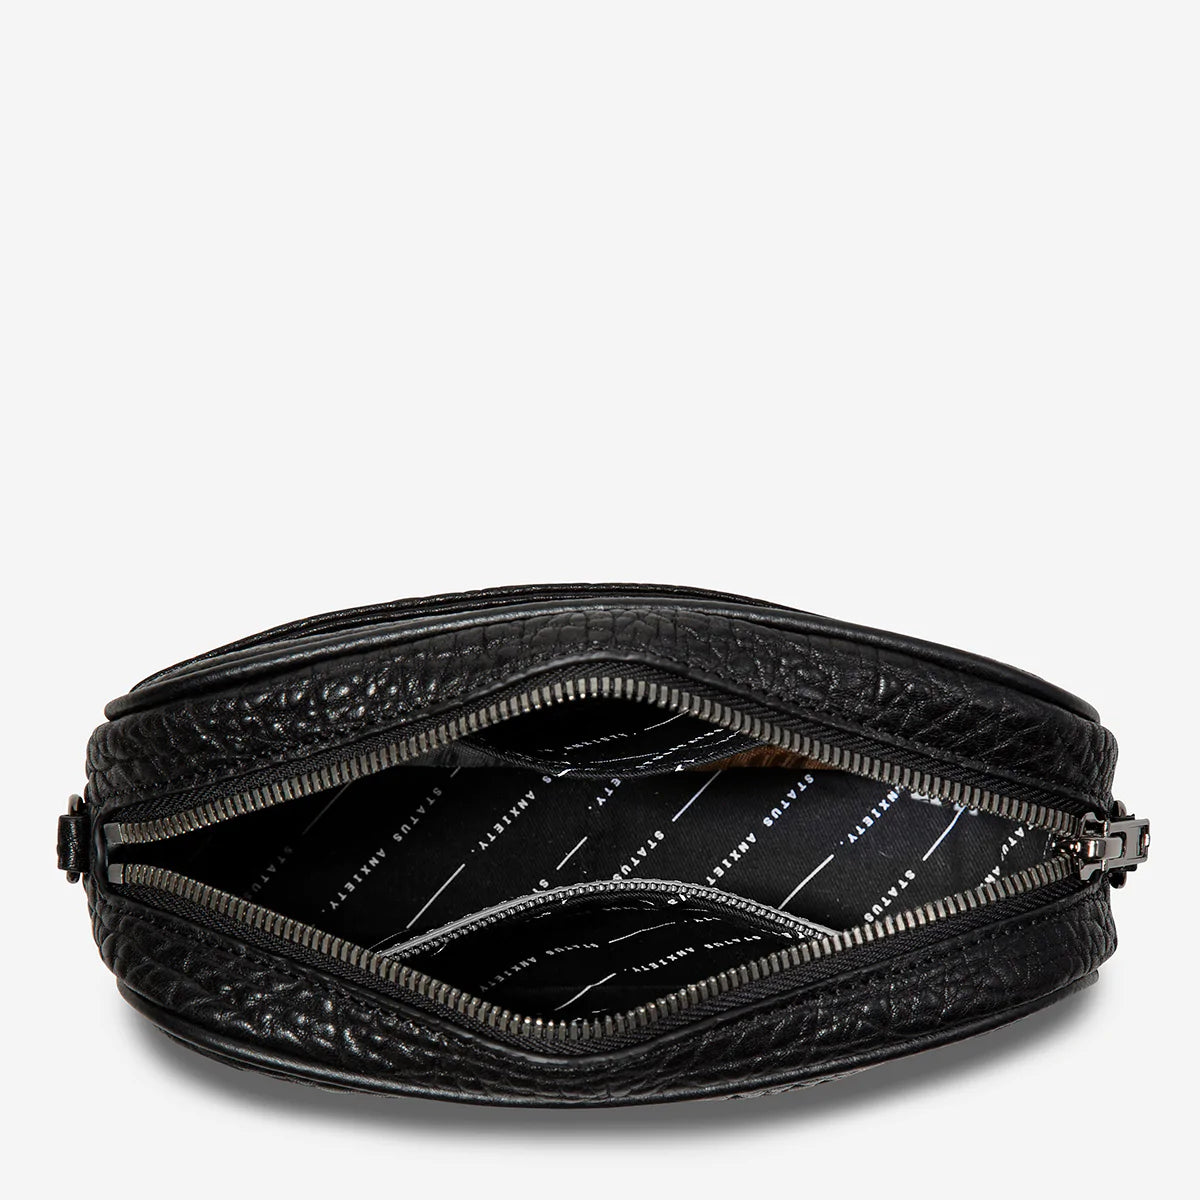 STATUS ANXIETY // Plunder With Webbed Strap Bag BLACK BUBBLE